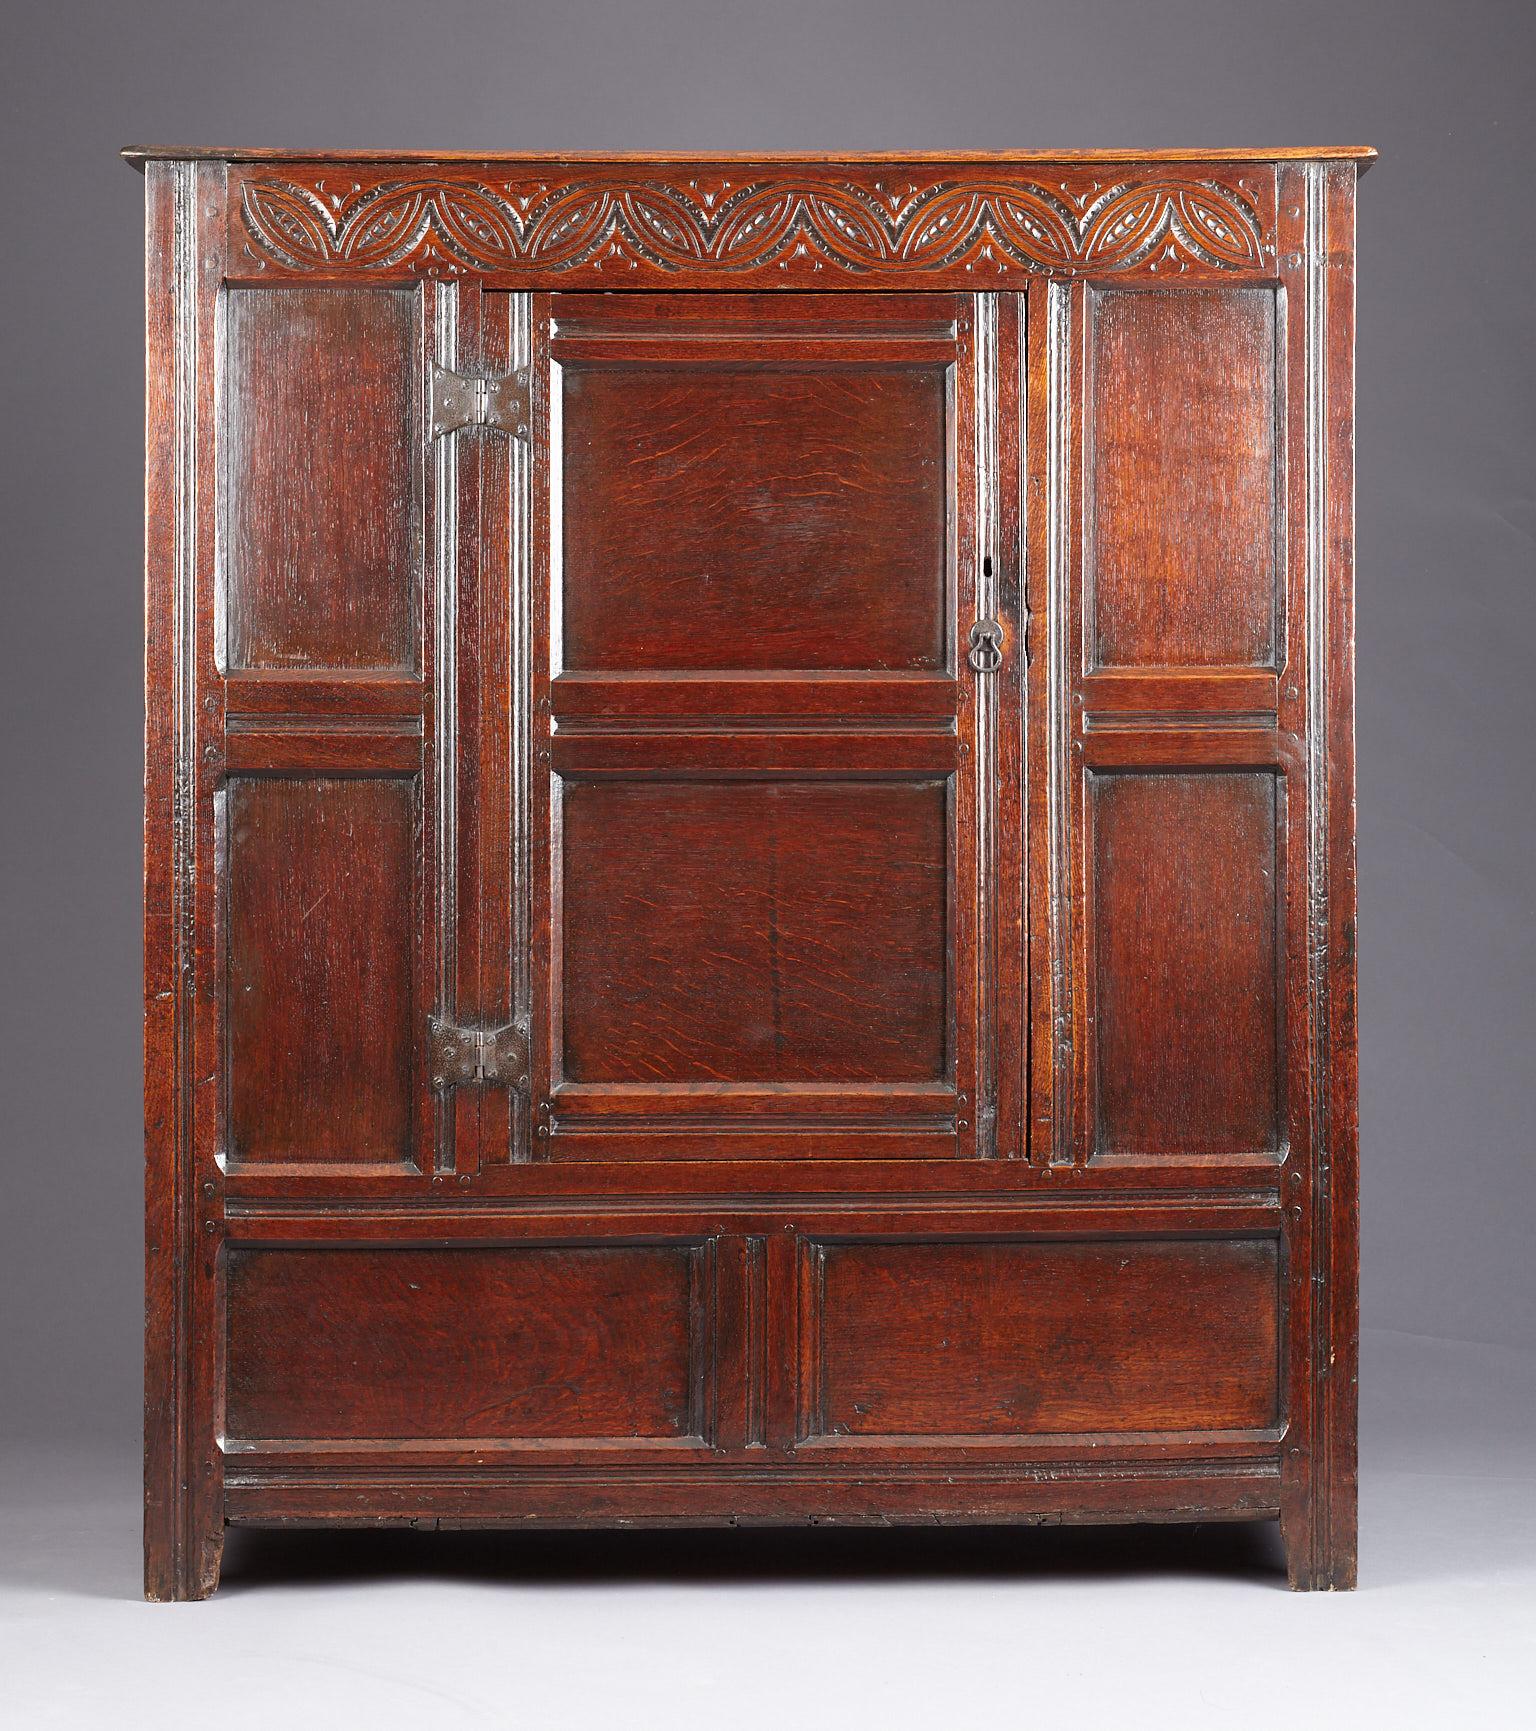 Small Charles II oak wardrobe or clothes press, Lancashire, circa 1670 - 1680.

The panelled cabinet with lunette carved top frieze and single cupboard door with original iron butterfly hinges, flanked by deep moulded framed vertical panels above a